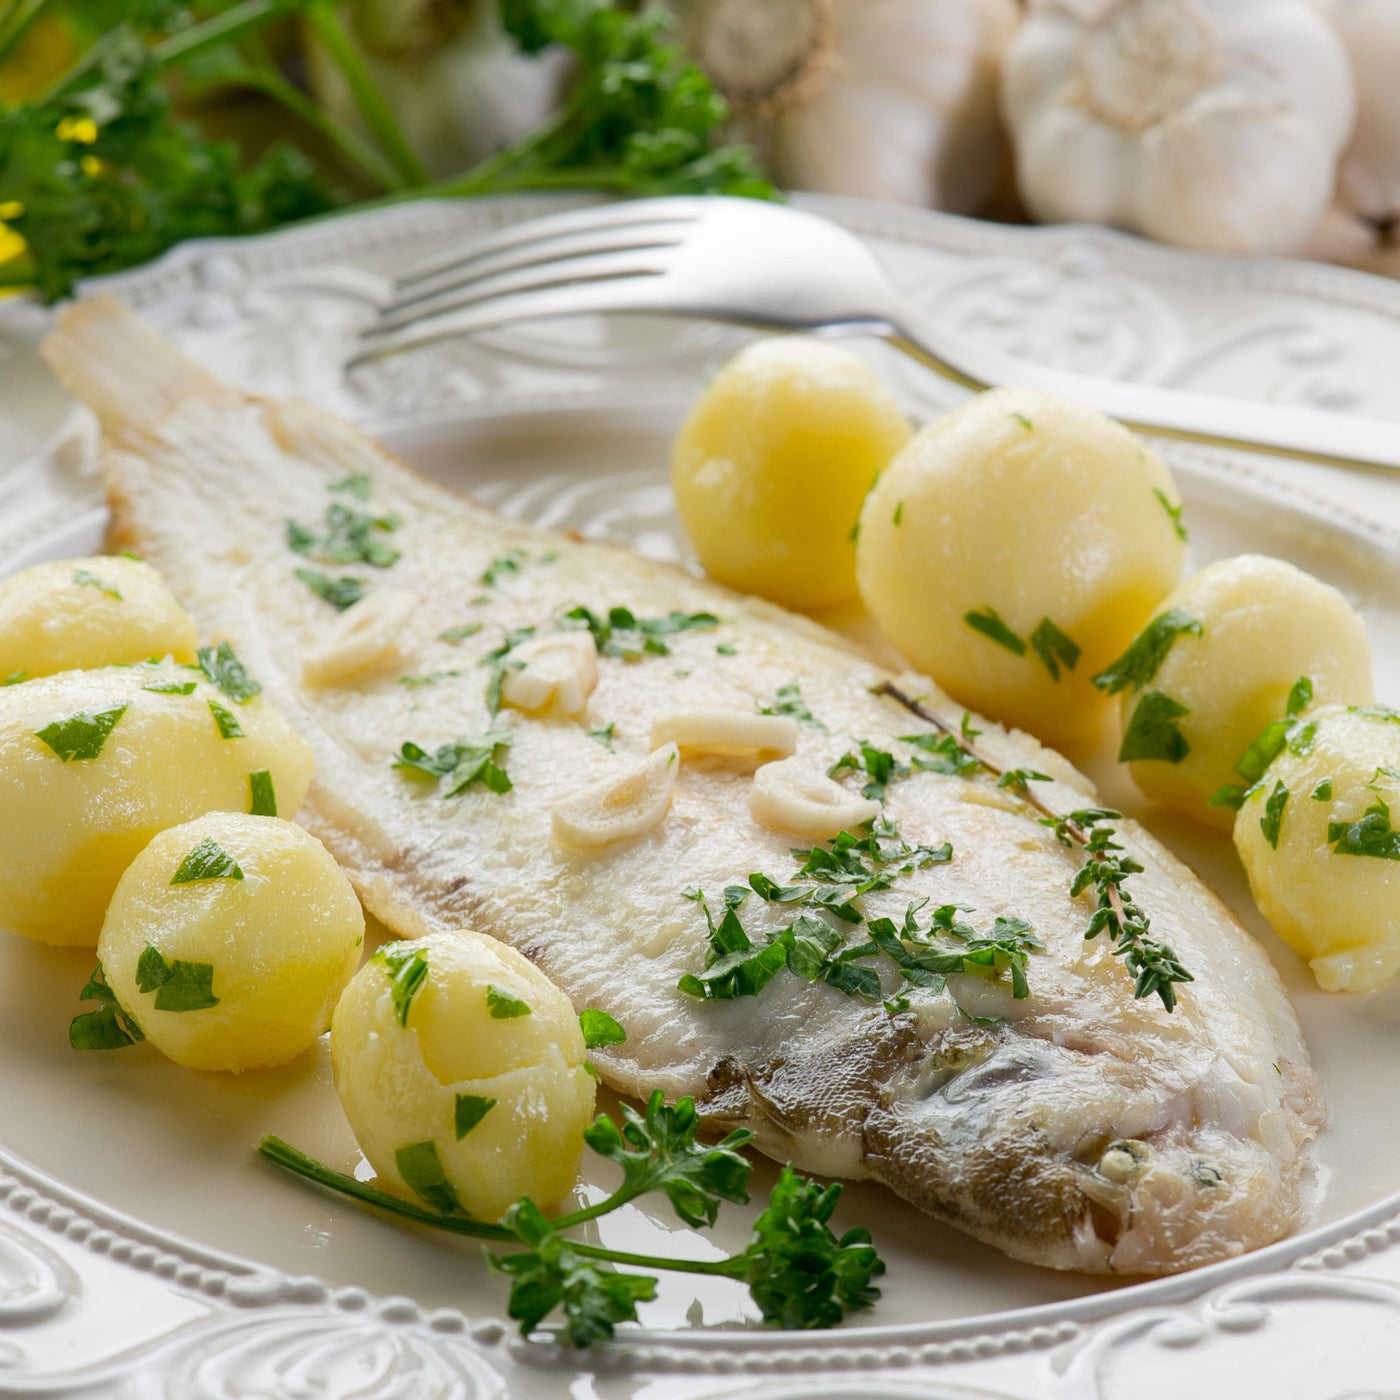 Dover Sole Whole to Buy Online. "Kitchen Ready" with tail and spine intact for tableside presentation. 